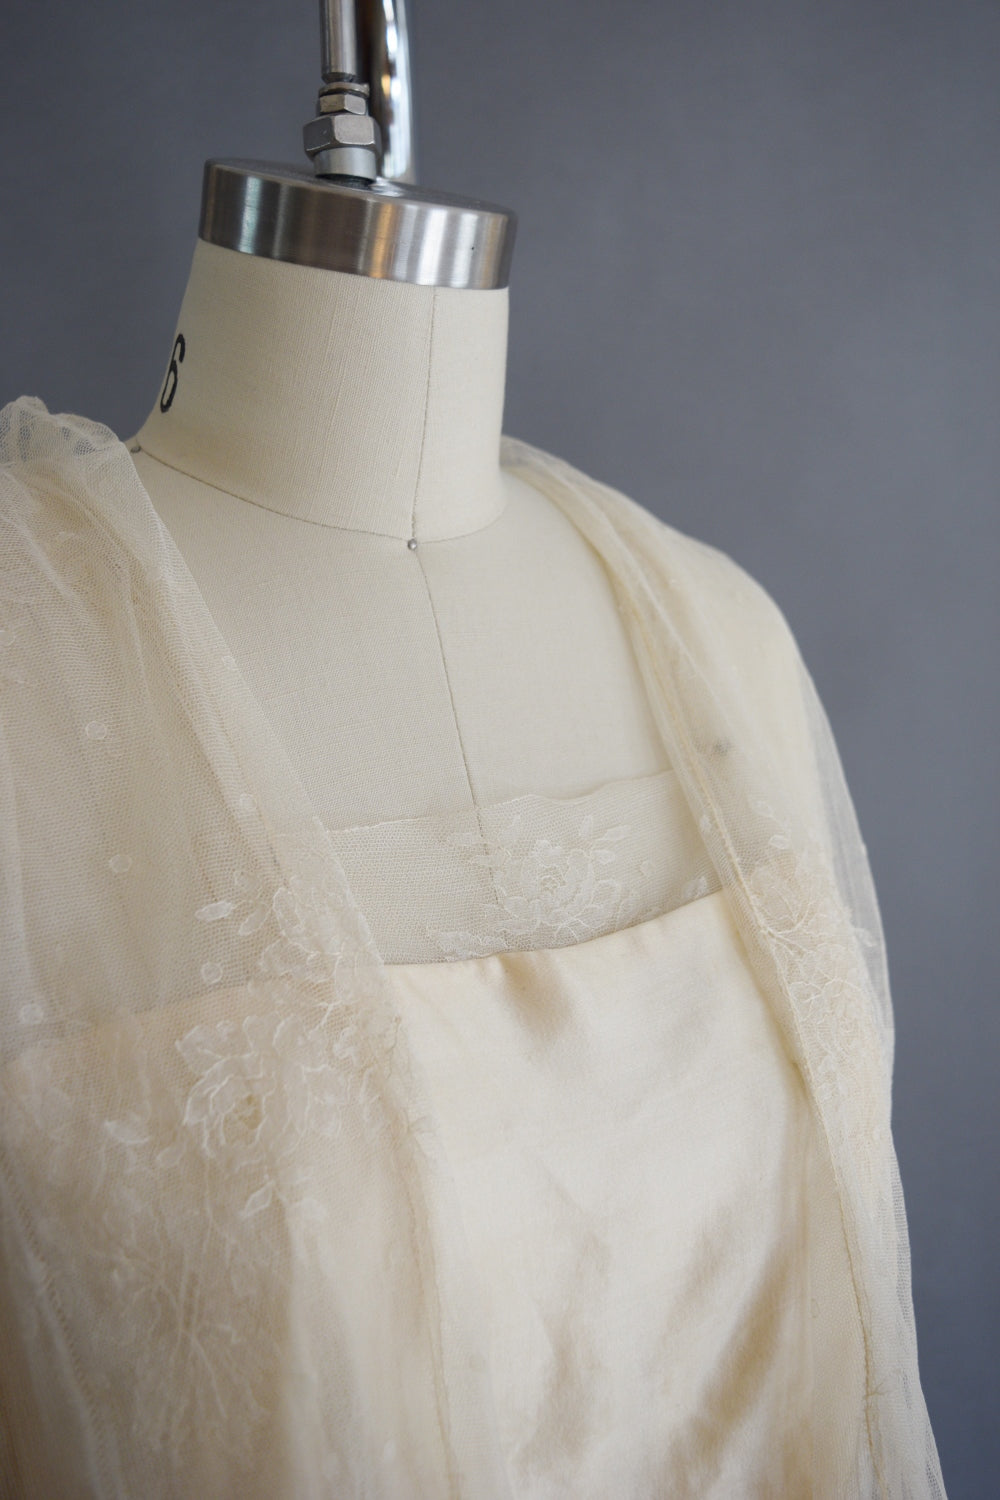 Late 1910s / early 1920s Silk Satin and Lace Couture Wedding Dress  | Antique Wedding Dress | Silk Satin and Lace | Xsmall - Small